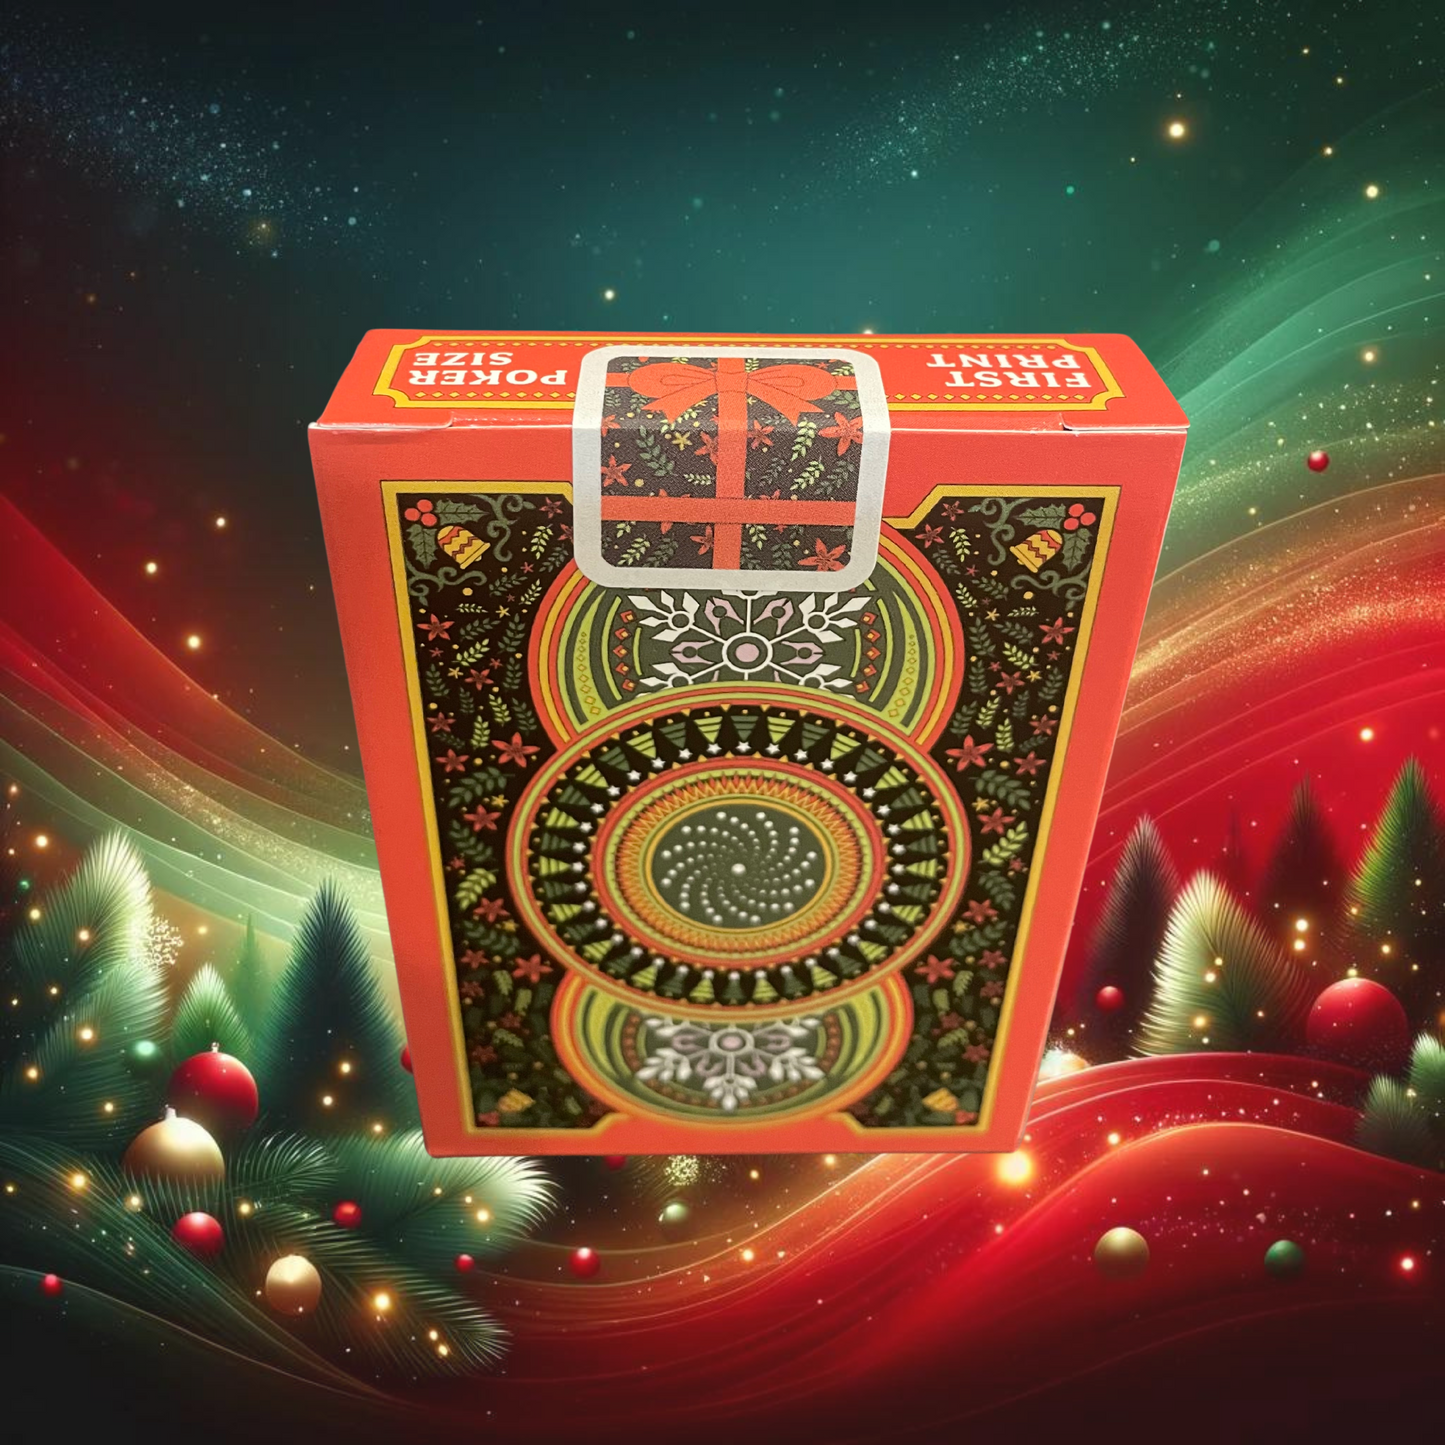 Nutcracker Bicycle Playing Cards